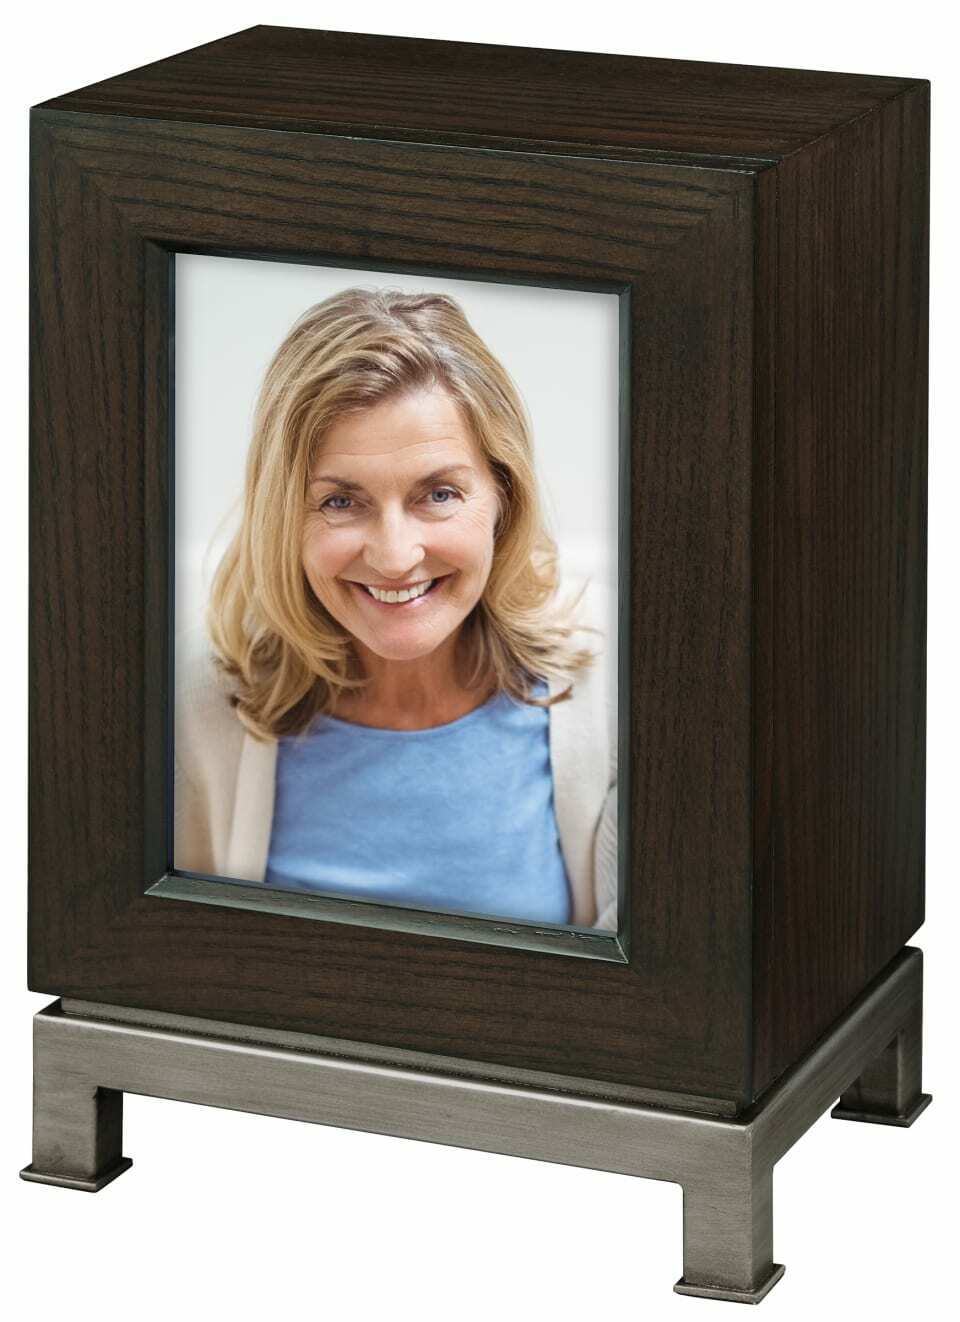 Howard Miller 800-226 (800226) Metro II Mantel Cremation Urn for Ashes,275 inch